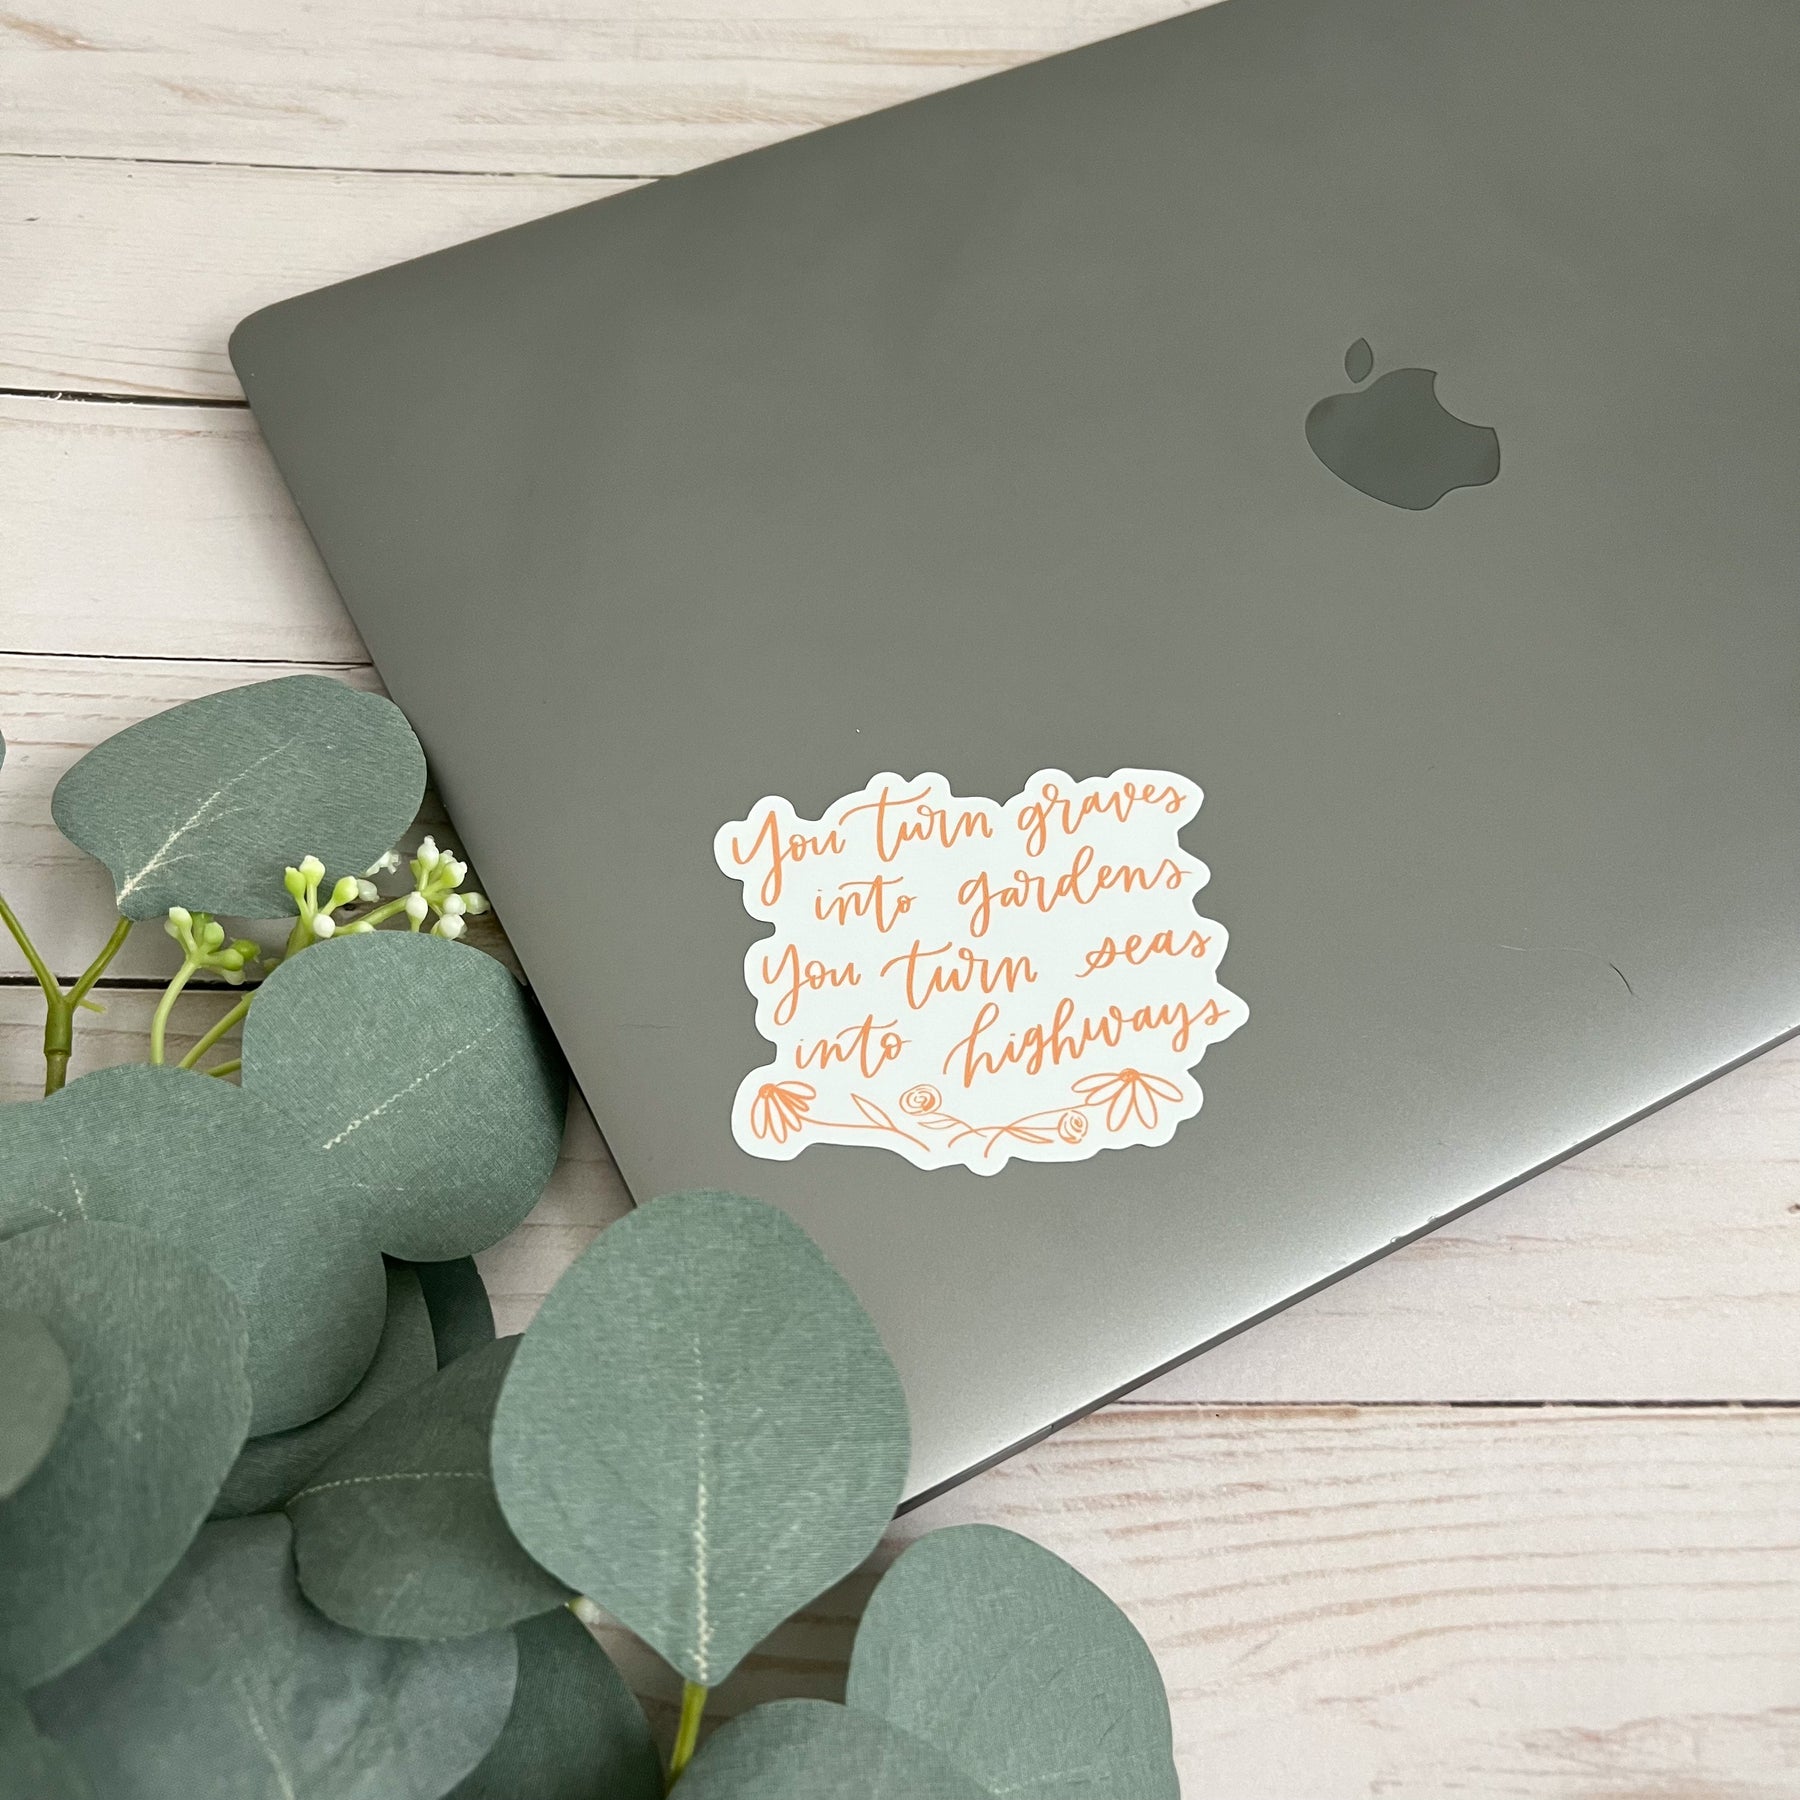 Swaygirls Christian sticker | Faith sticker for a hydro flask, laptop,  Bible etc | Waterproof, vinyl decals about God, Jesus | You are where God  wants